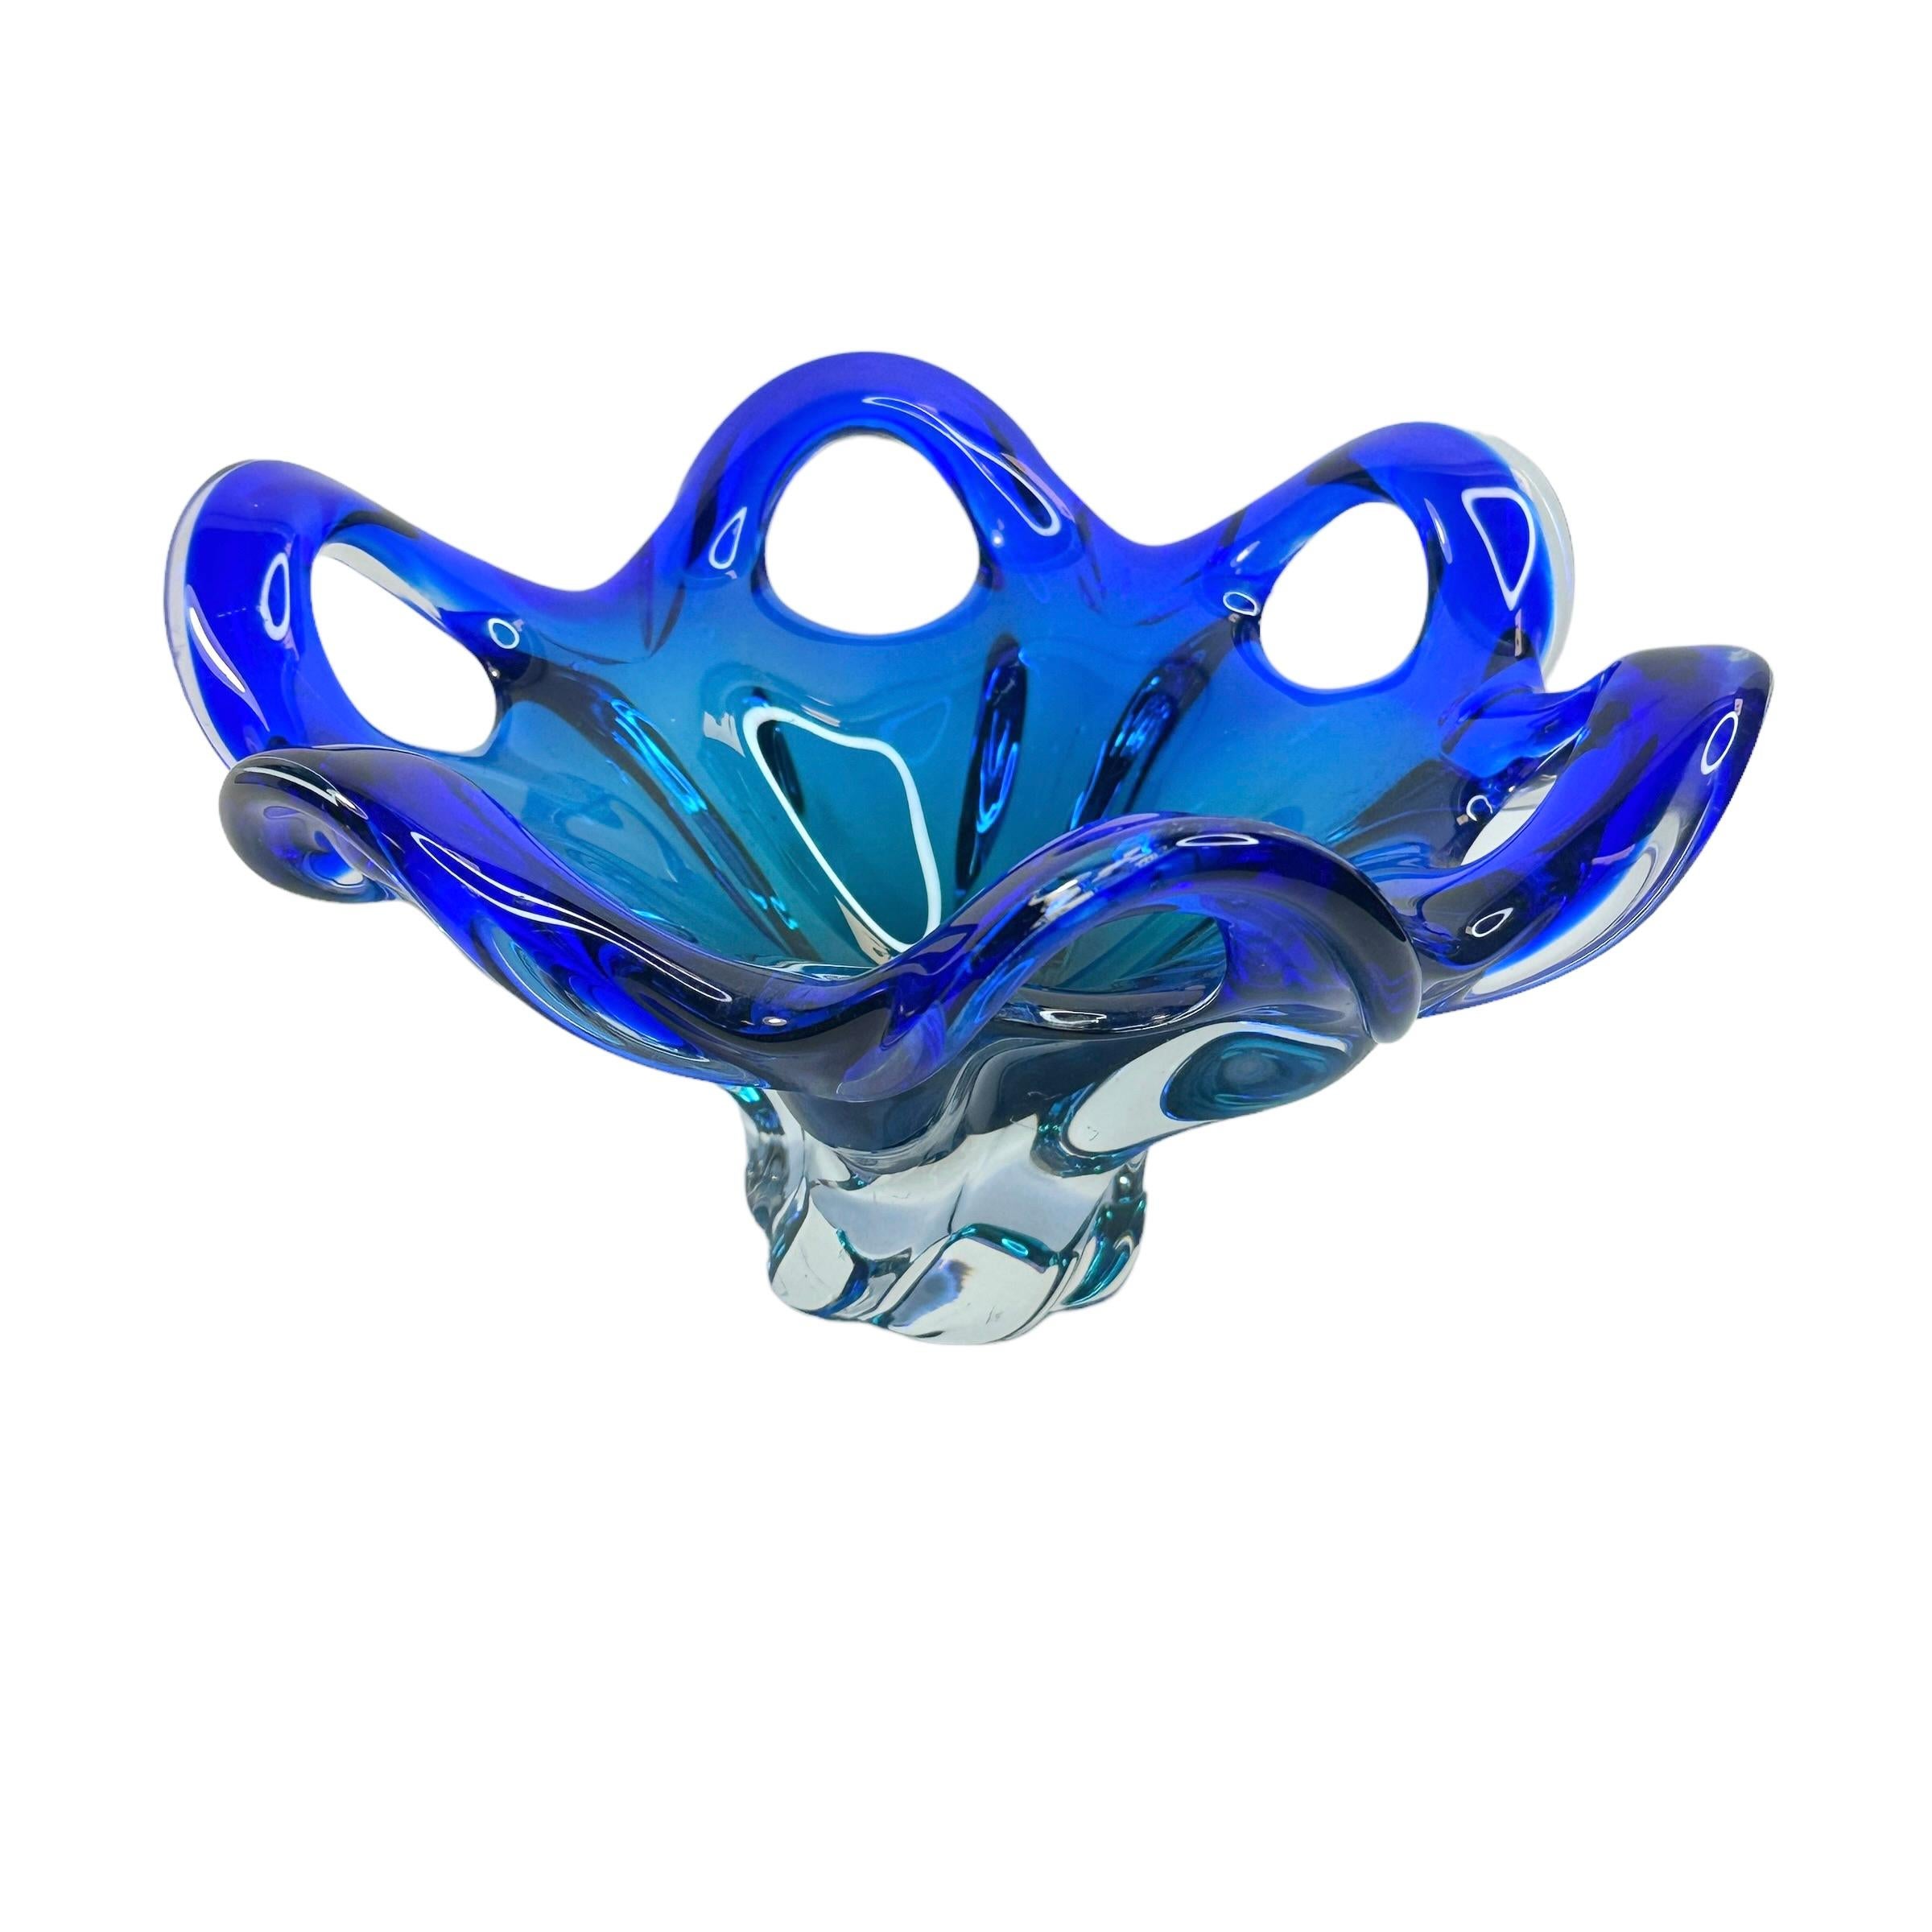 Late 20th Century Stunning Murano Art Glass Bowl Catchall Blue and Clear, Vintage, Italy, 1970s For Sale